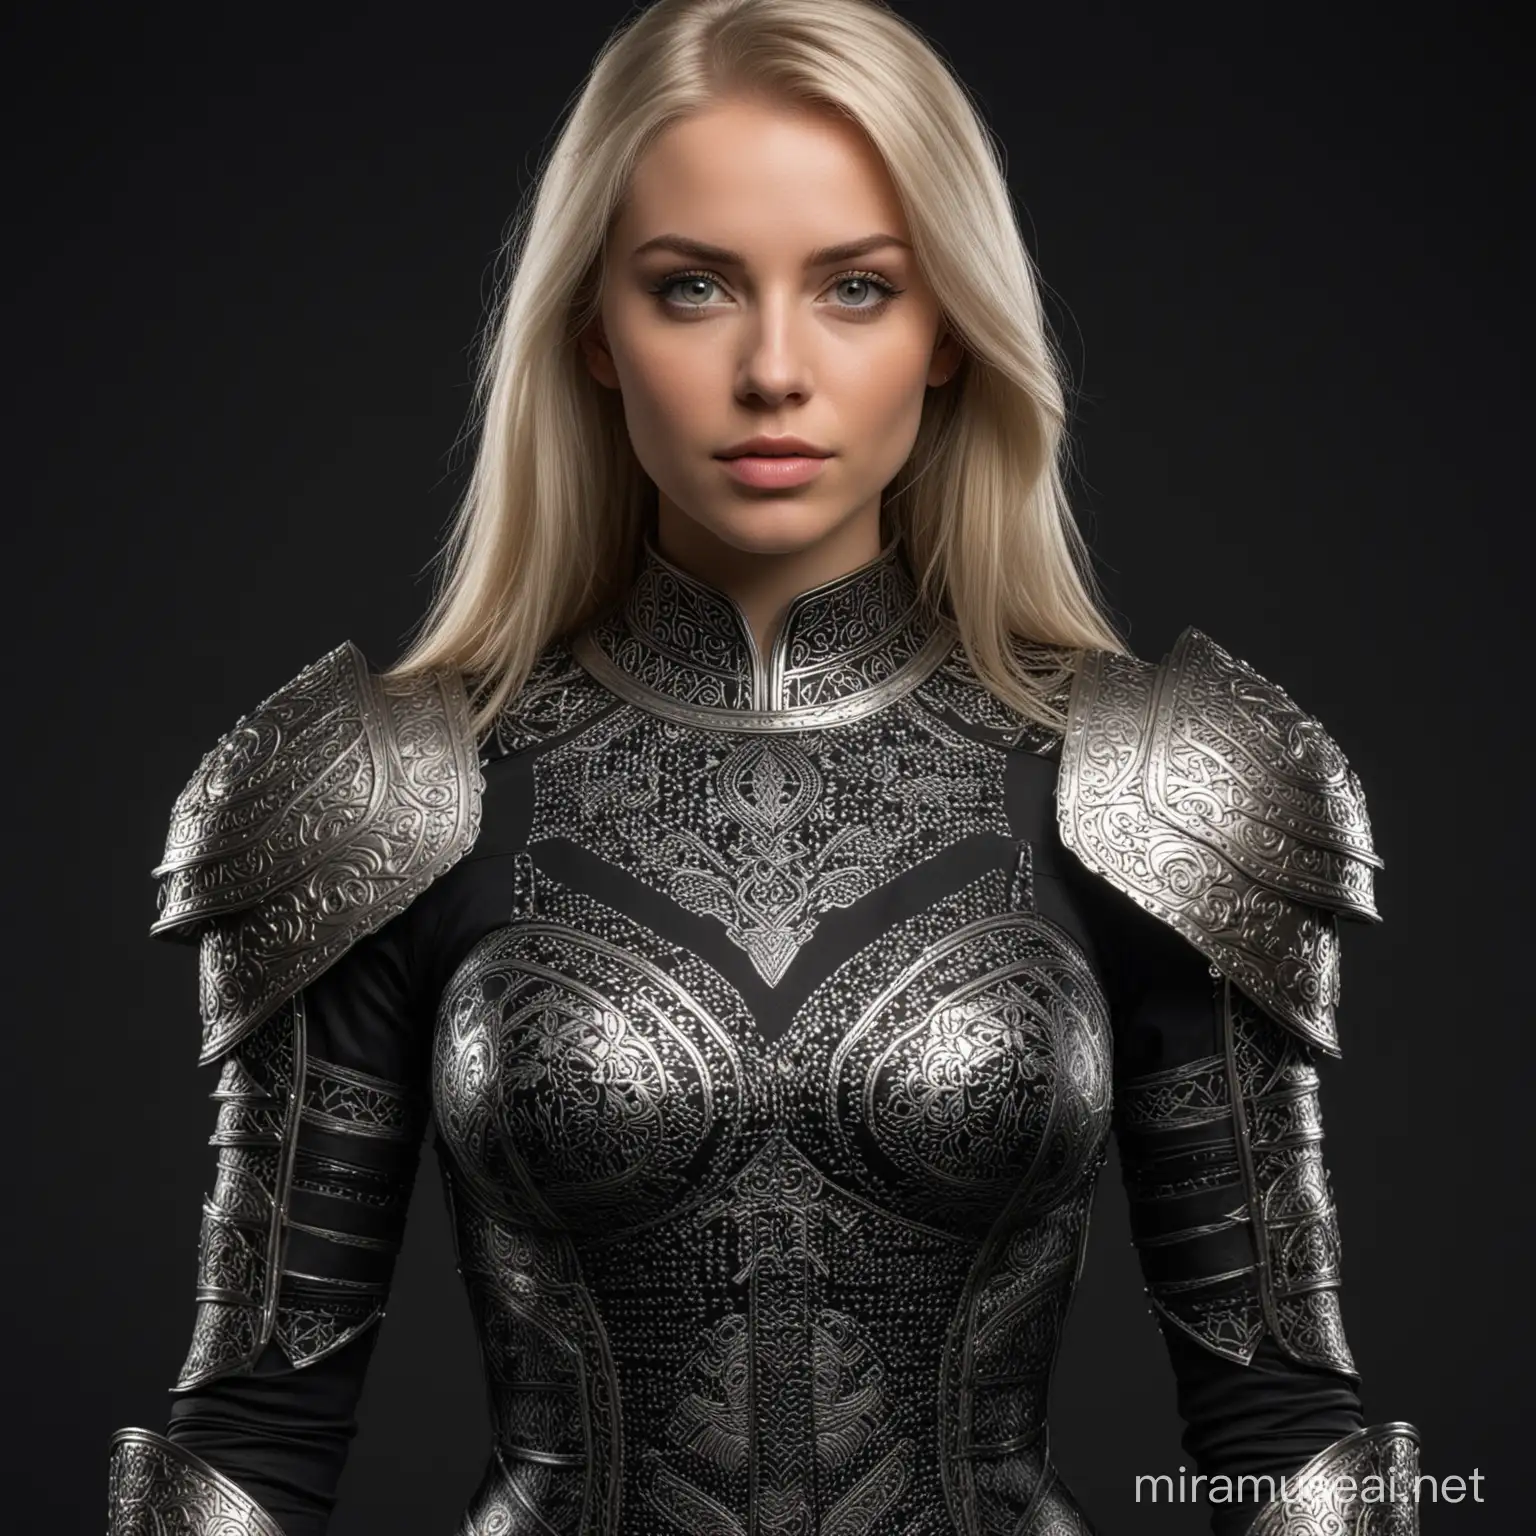 A full body picture of a 28 year old woman with silver eyes. White skin. Blond straight hair. Wearing black blouse under silver armor with intricate black pattern woven into it. Black background in image.